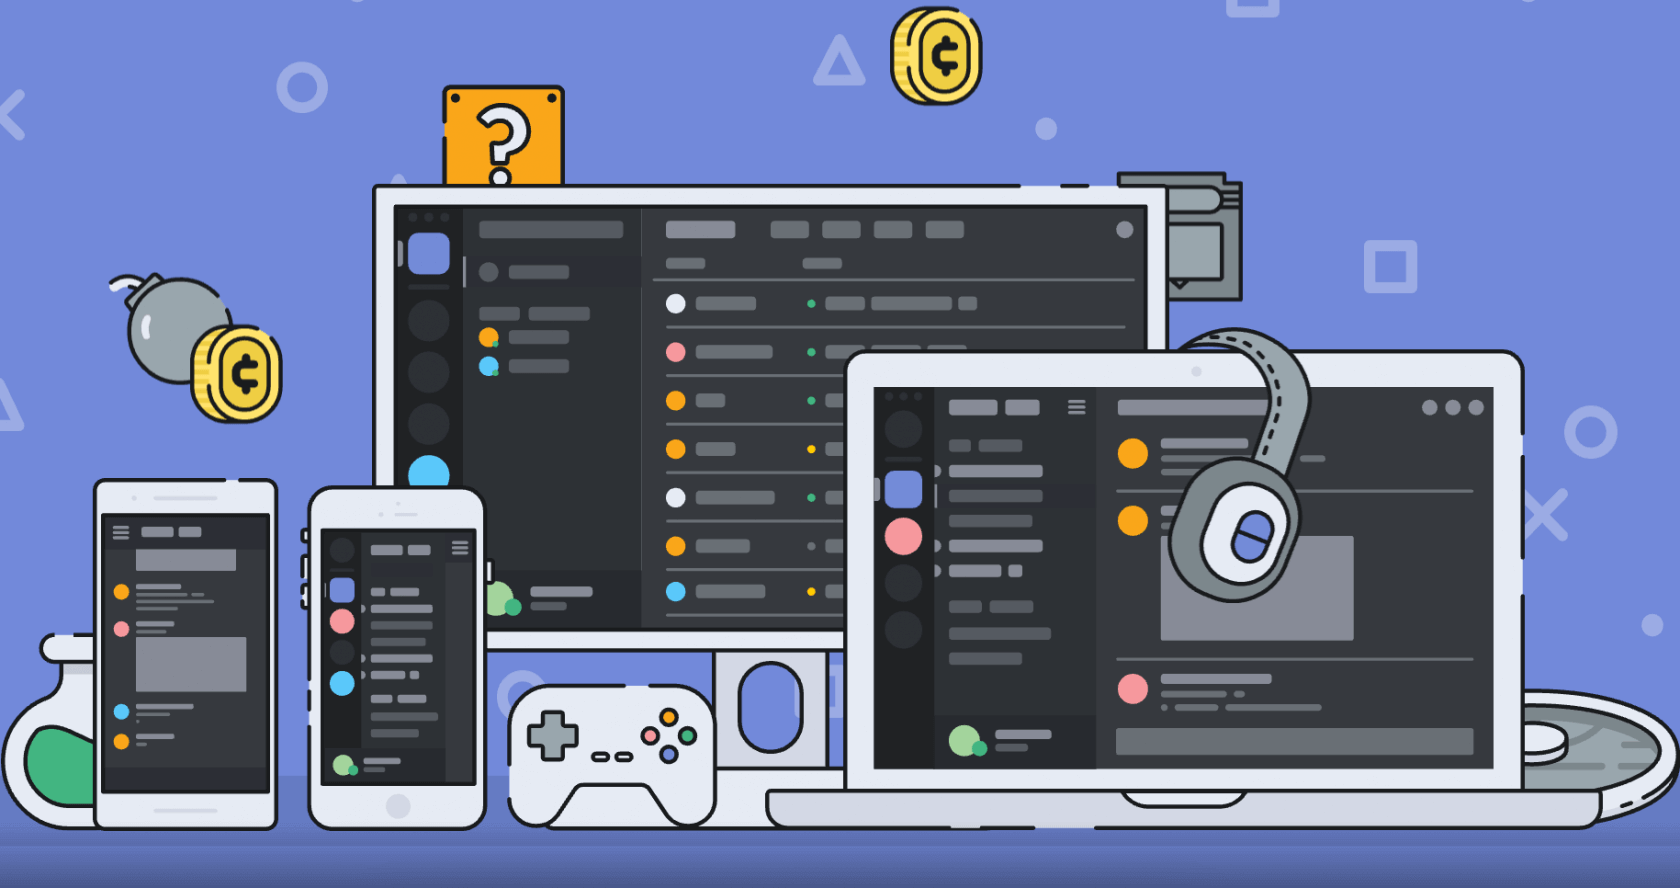 Discord's 'Snowsgiving' event brings a $26,000 game tournament, hardware giveaways, and more